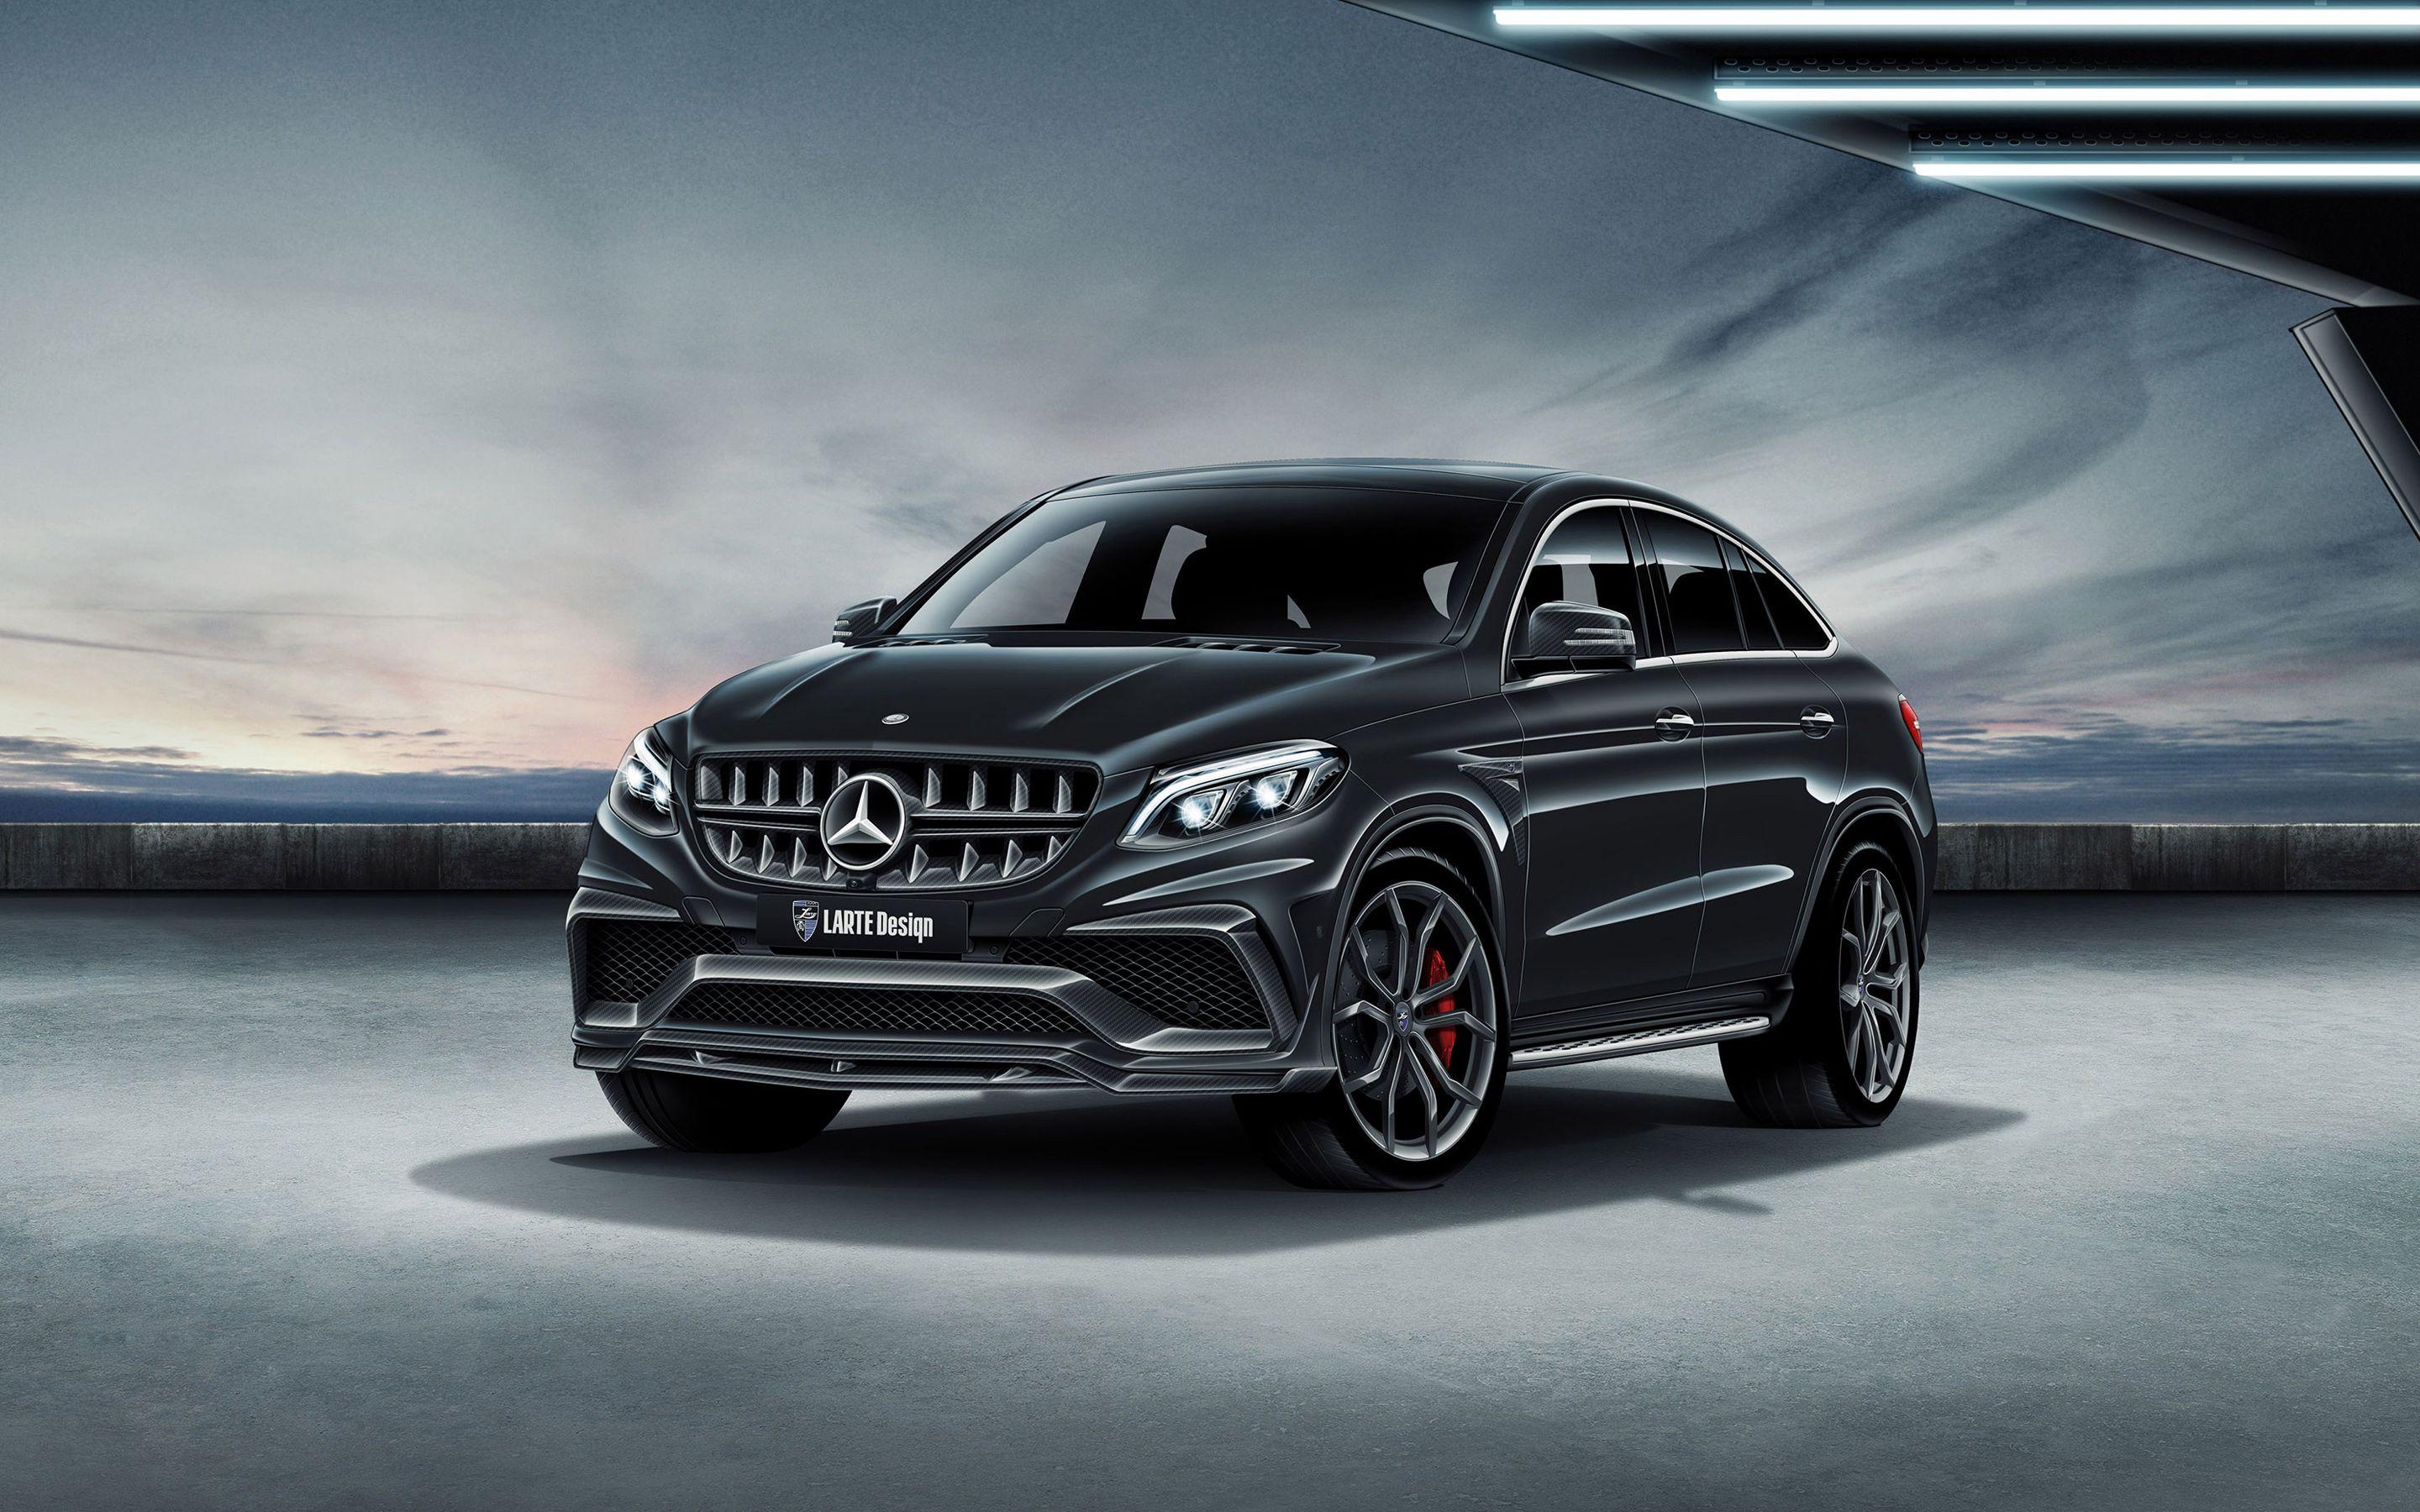 Mercedes Benz Gle Wallpapers Top Free Mercedes Benz Gle Backgrounds Wallpaperaccess